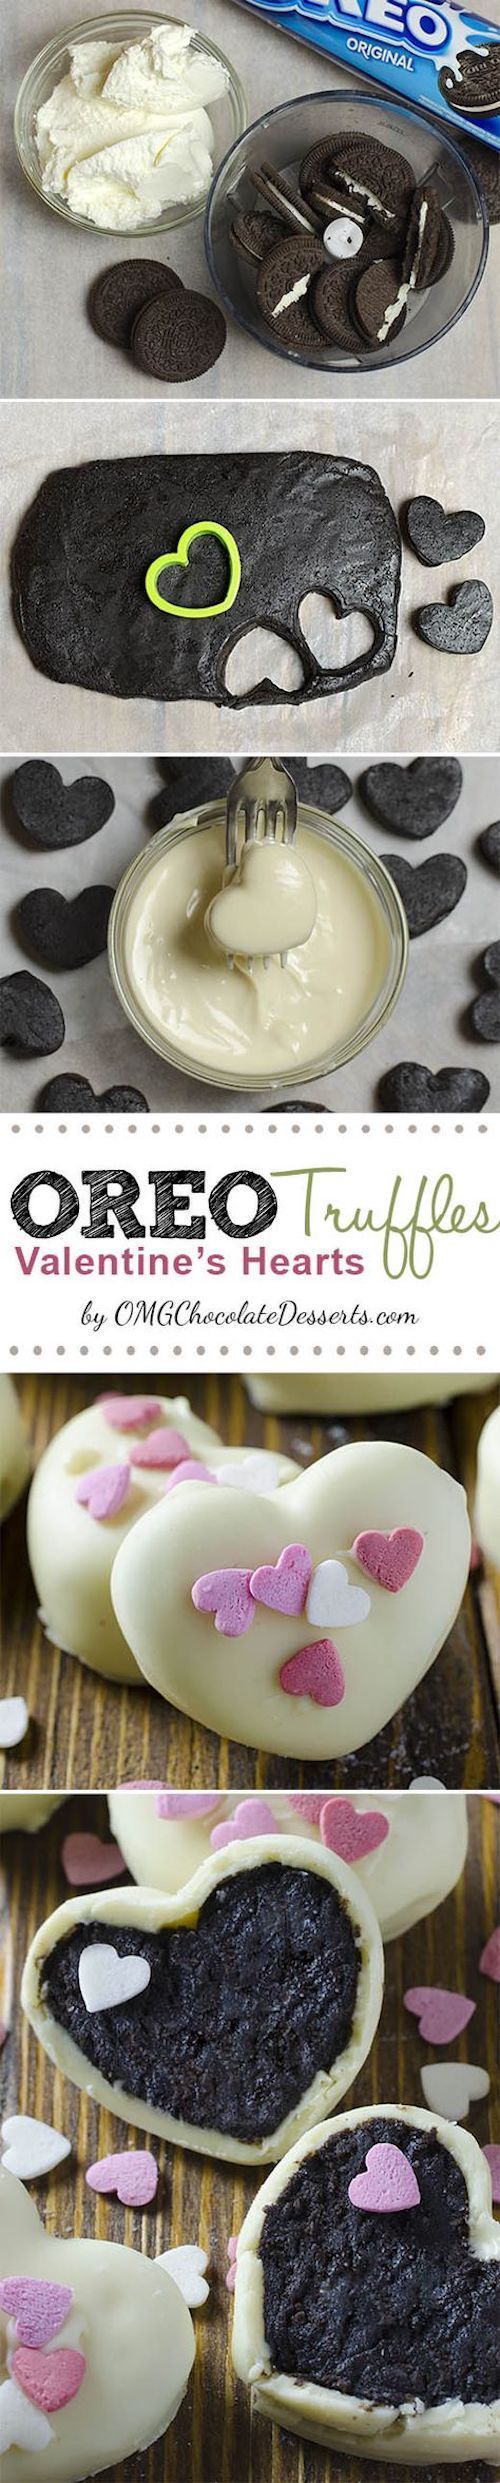 These are 3 ingredient heart shaped Oreo Cream Cheese Truffles covered with white chocolate, perfect for Valentines Day